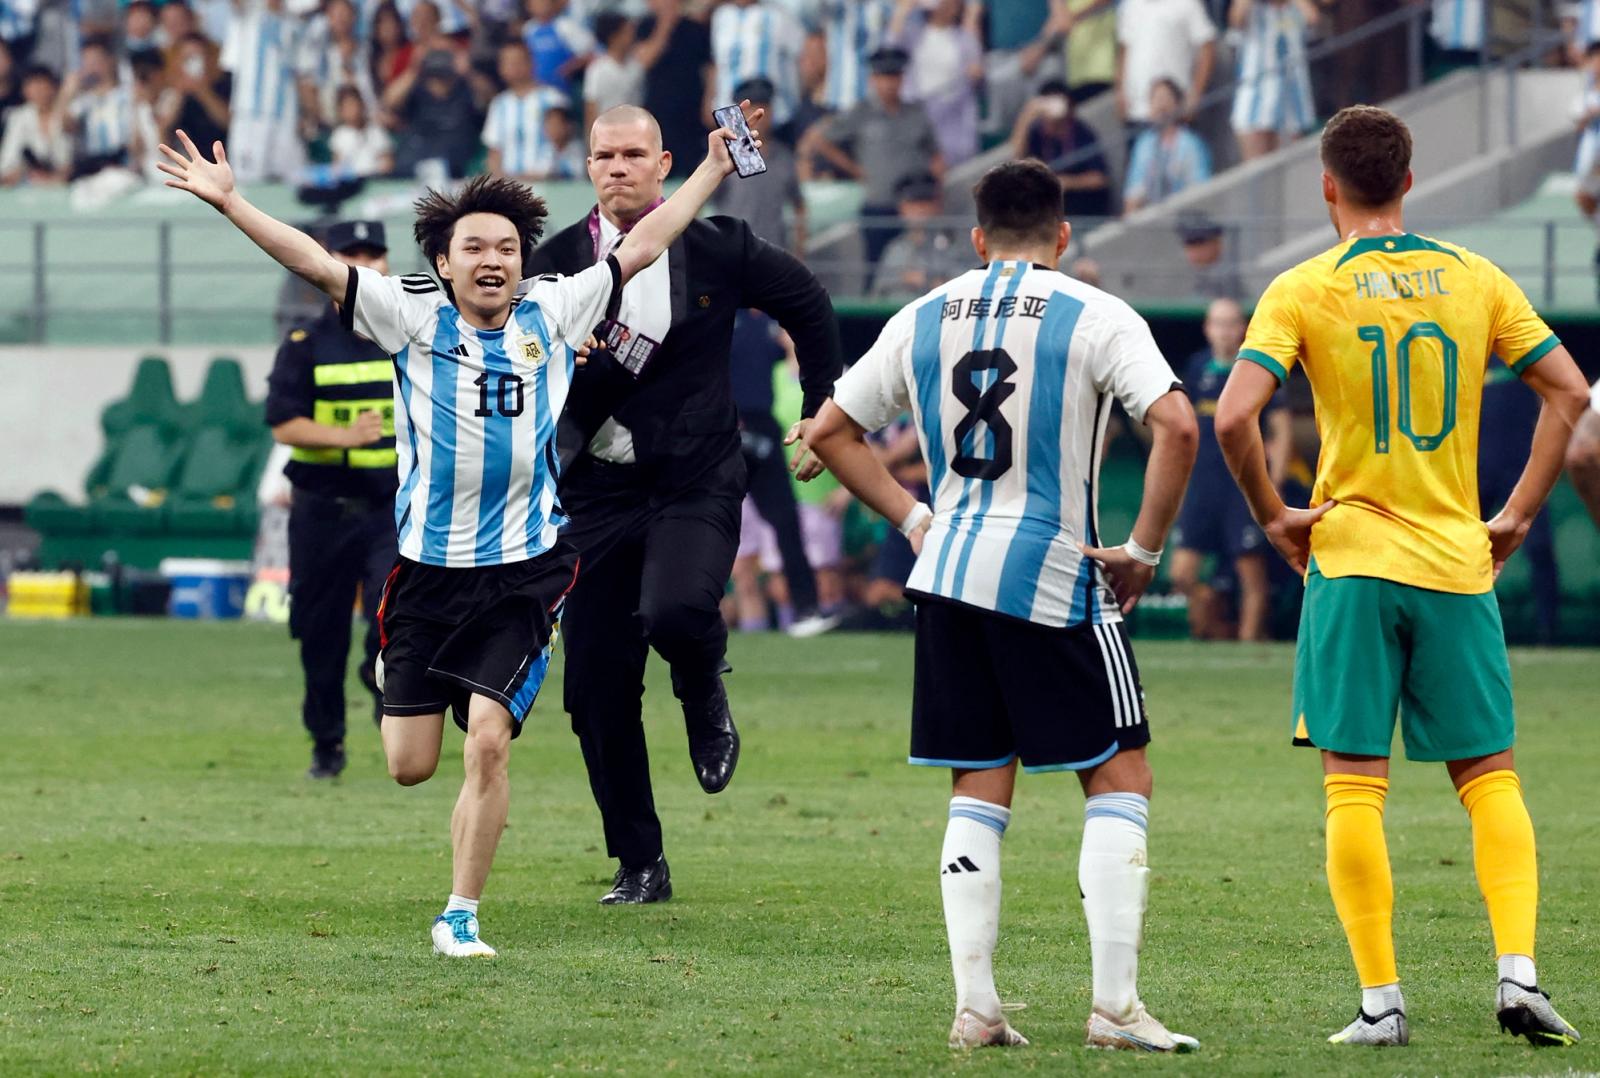 A pitch invader is chased by security officials during the match.